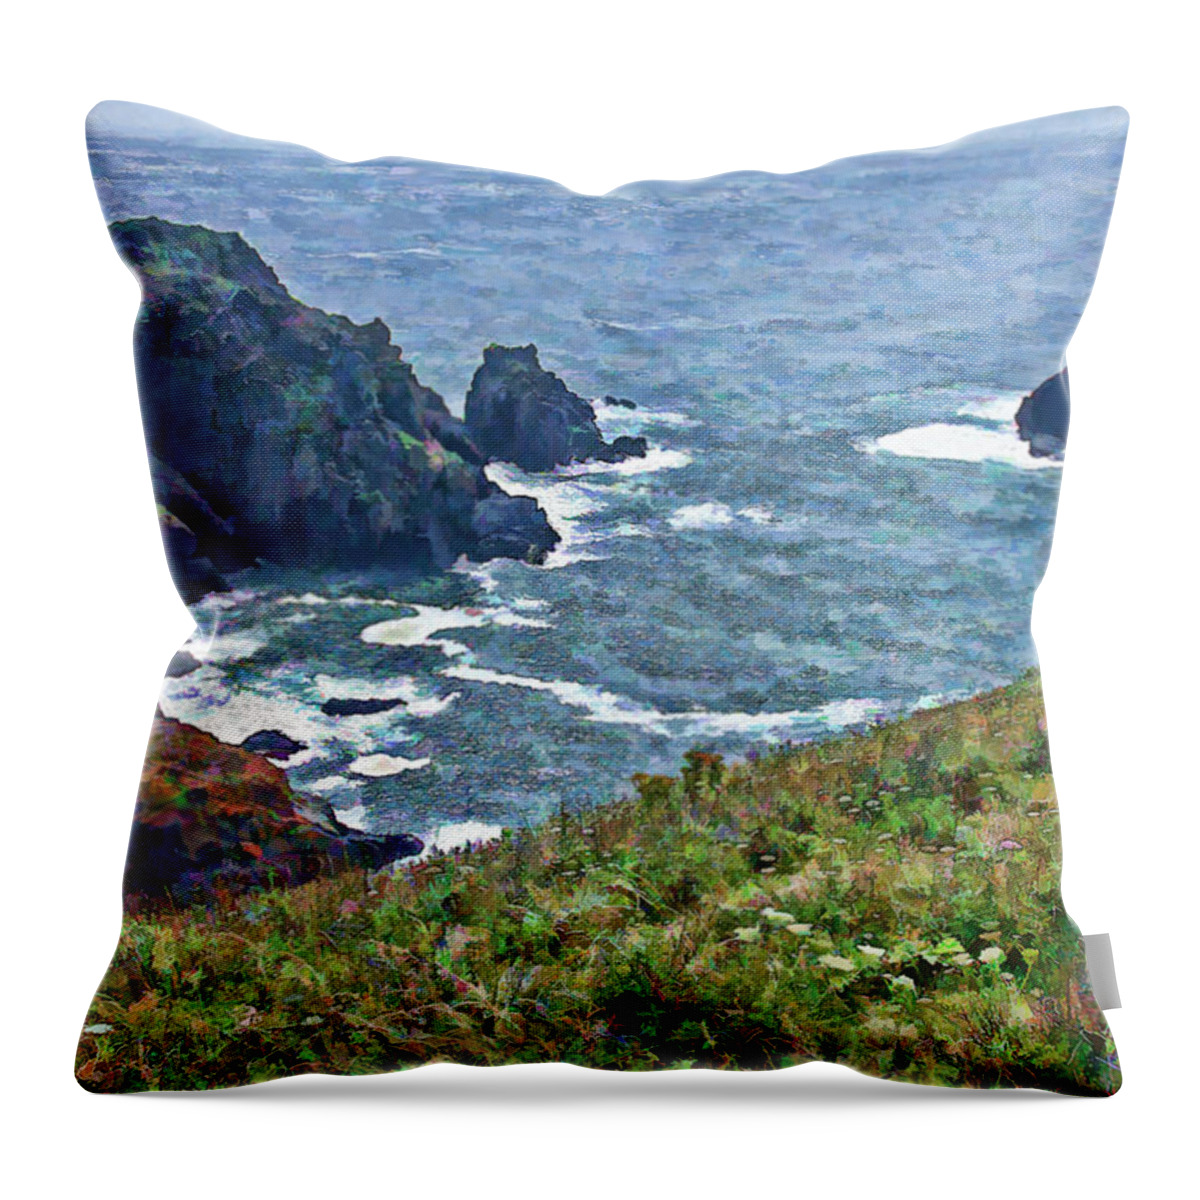 Guernsey Throw Pillow featuring the painting Flowers on Isle of Guernsey Cliffs by Bellesouth Studio